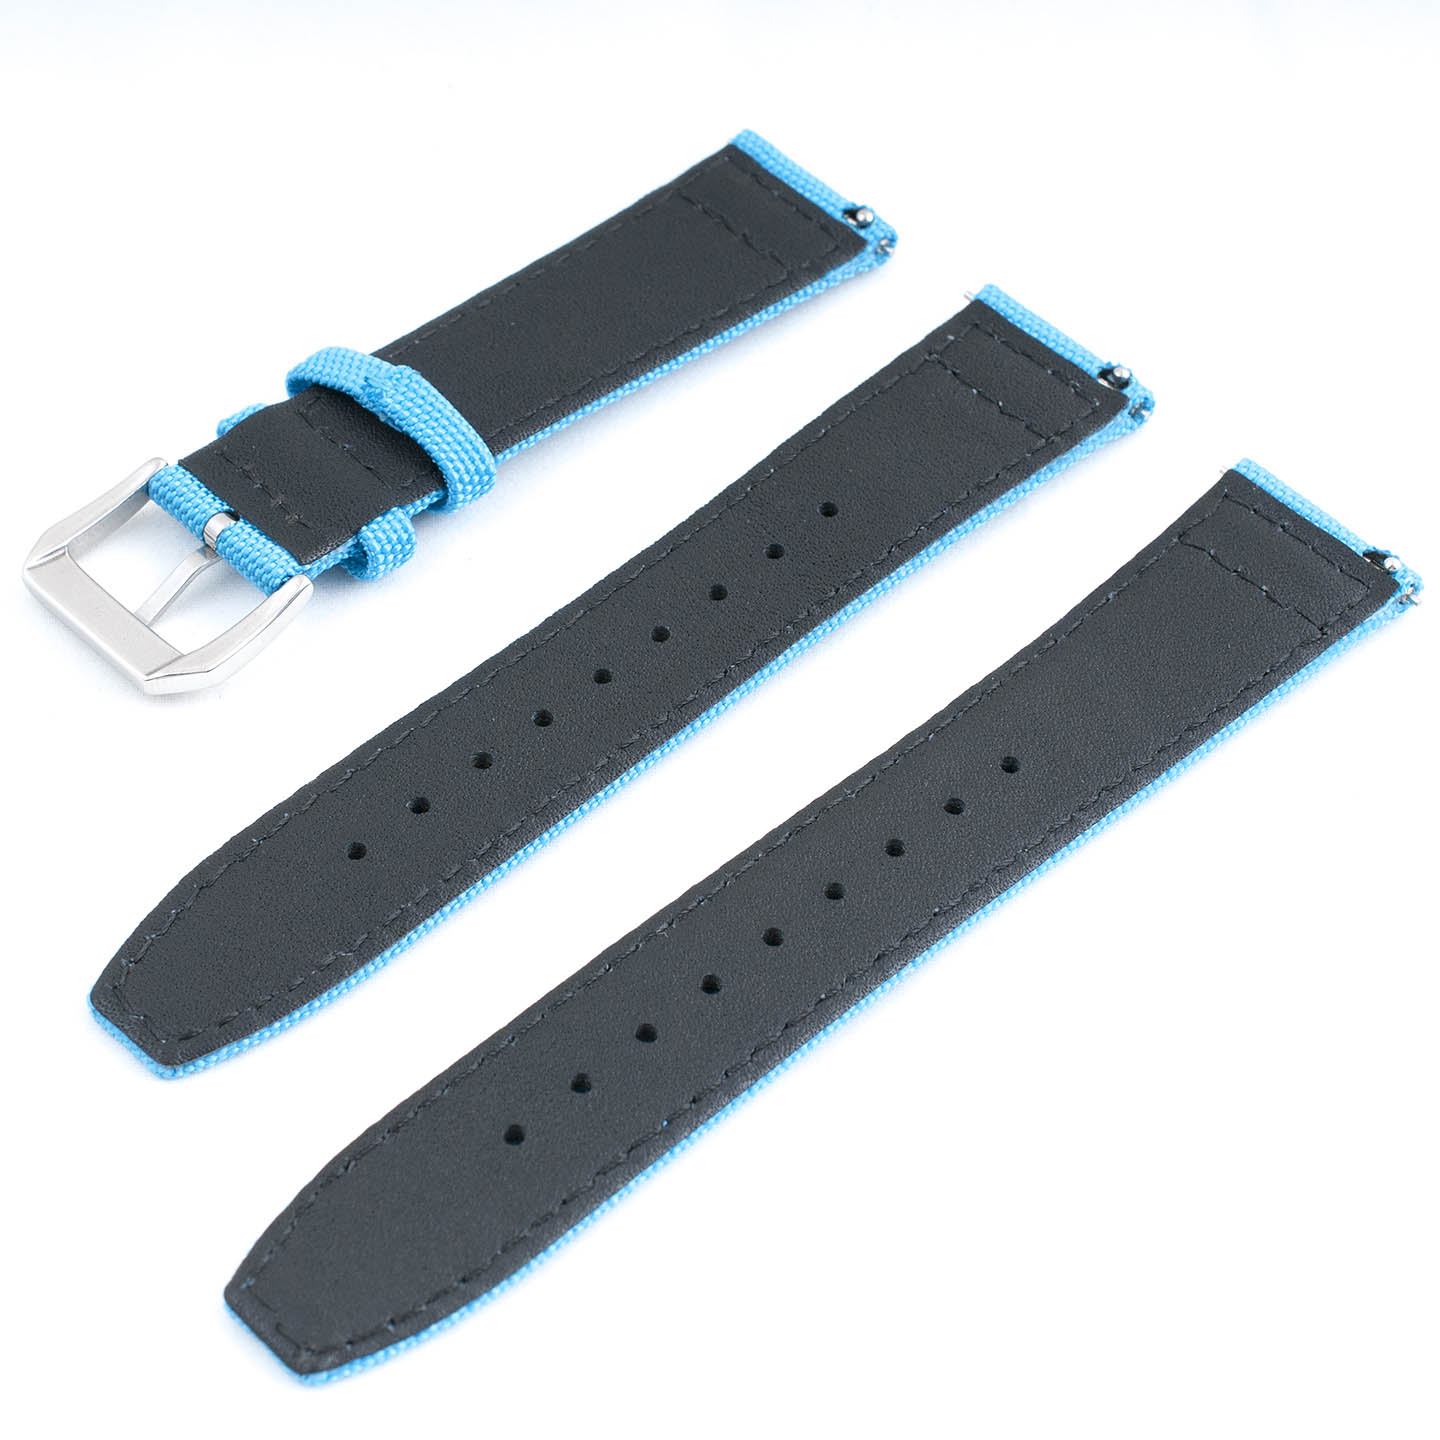 Premium Sailcloth Colorway Quick Release Watch Strap band replacement 19mm, 20mm, 21mm, 22mm for large wrists and small wrists, for men and women, unisex light bright sky blue